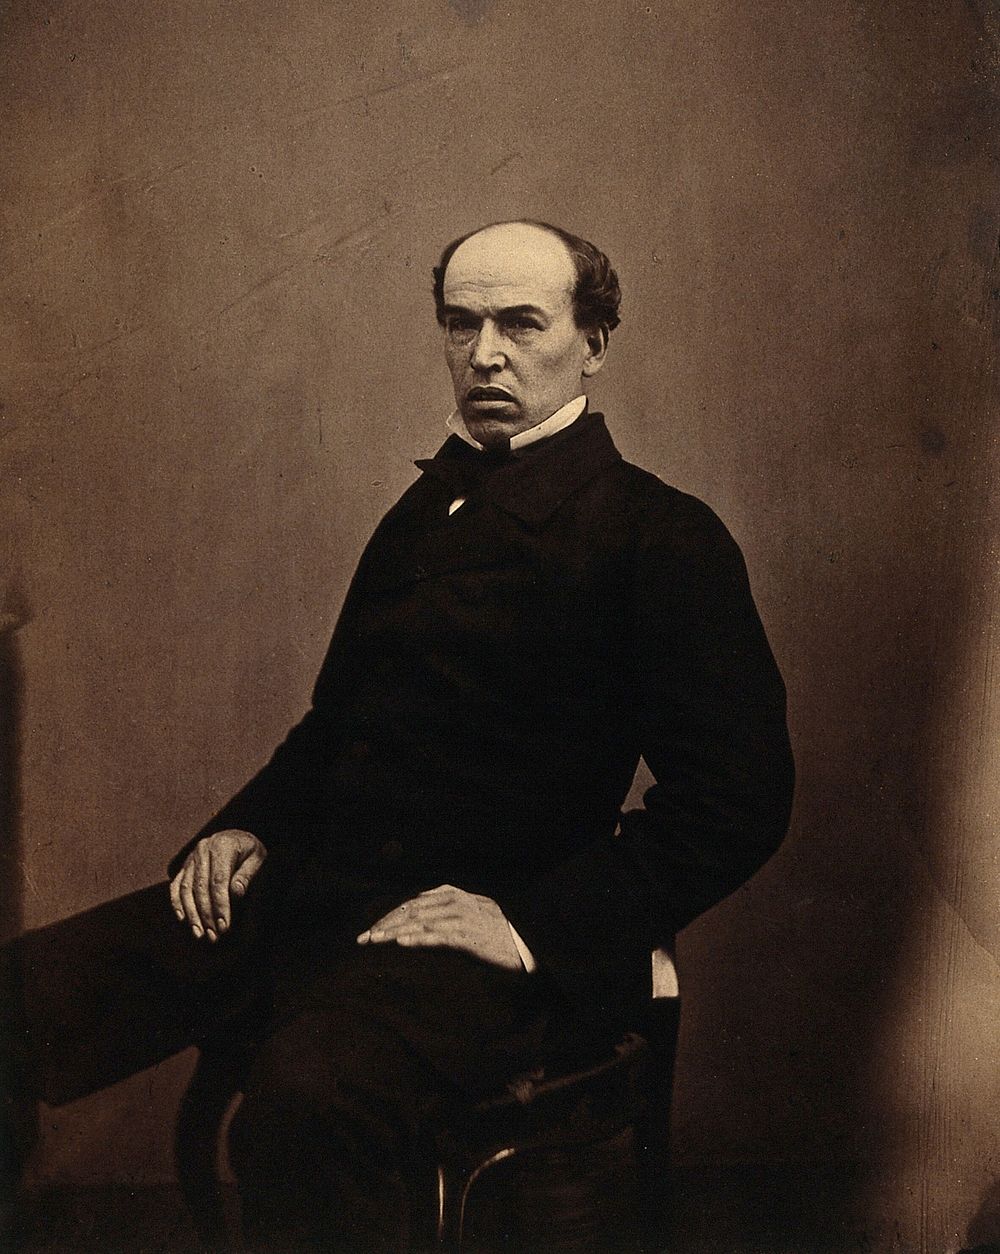 Sir William Jenner. Photograph by Maull & Polyblank.